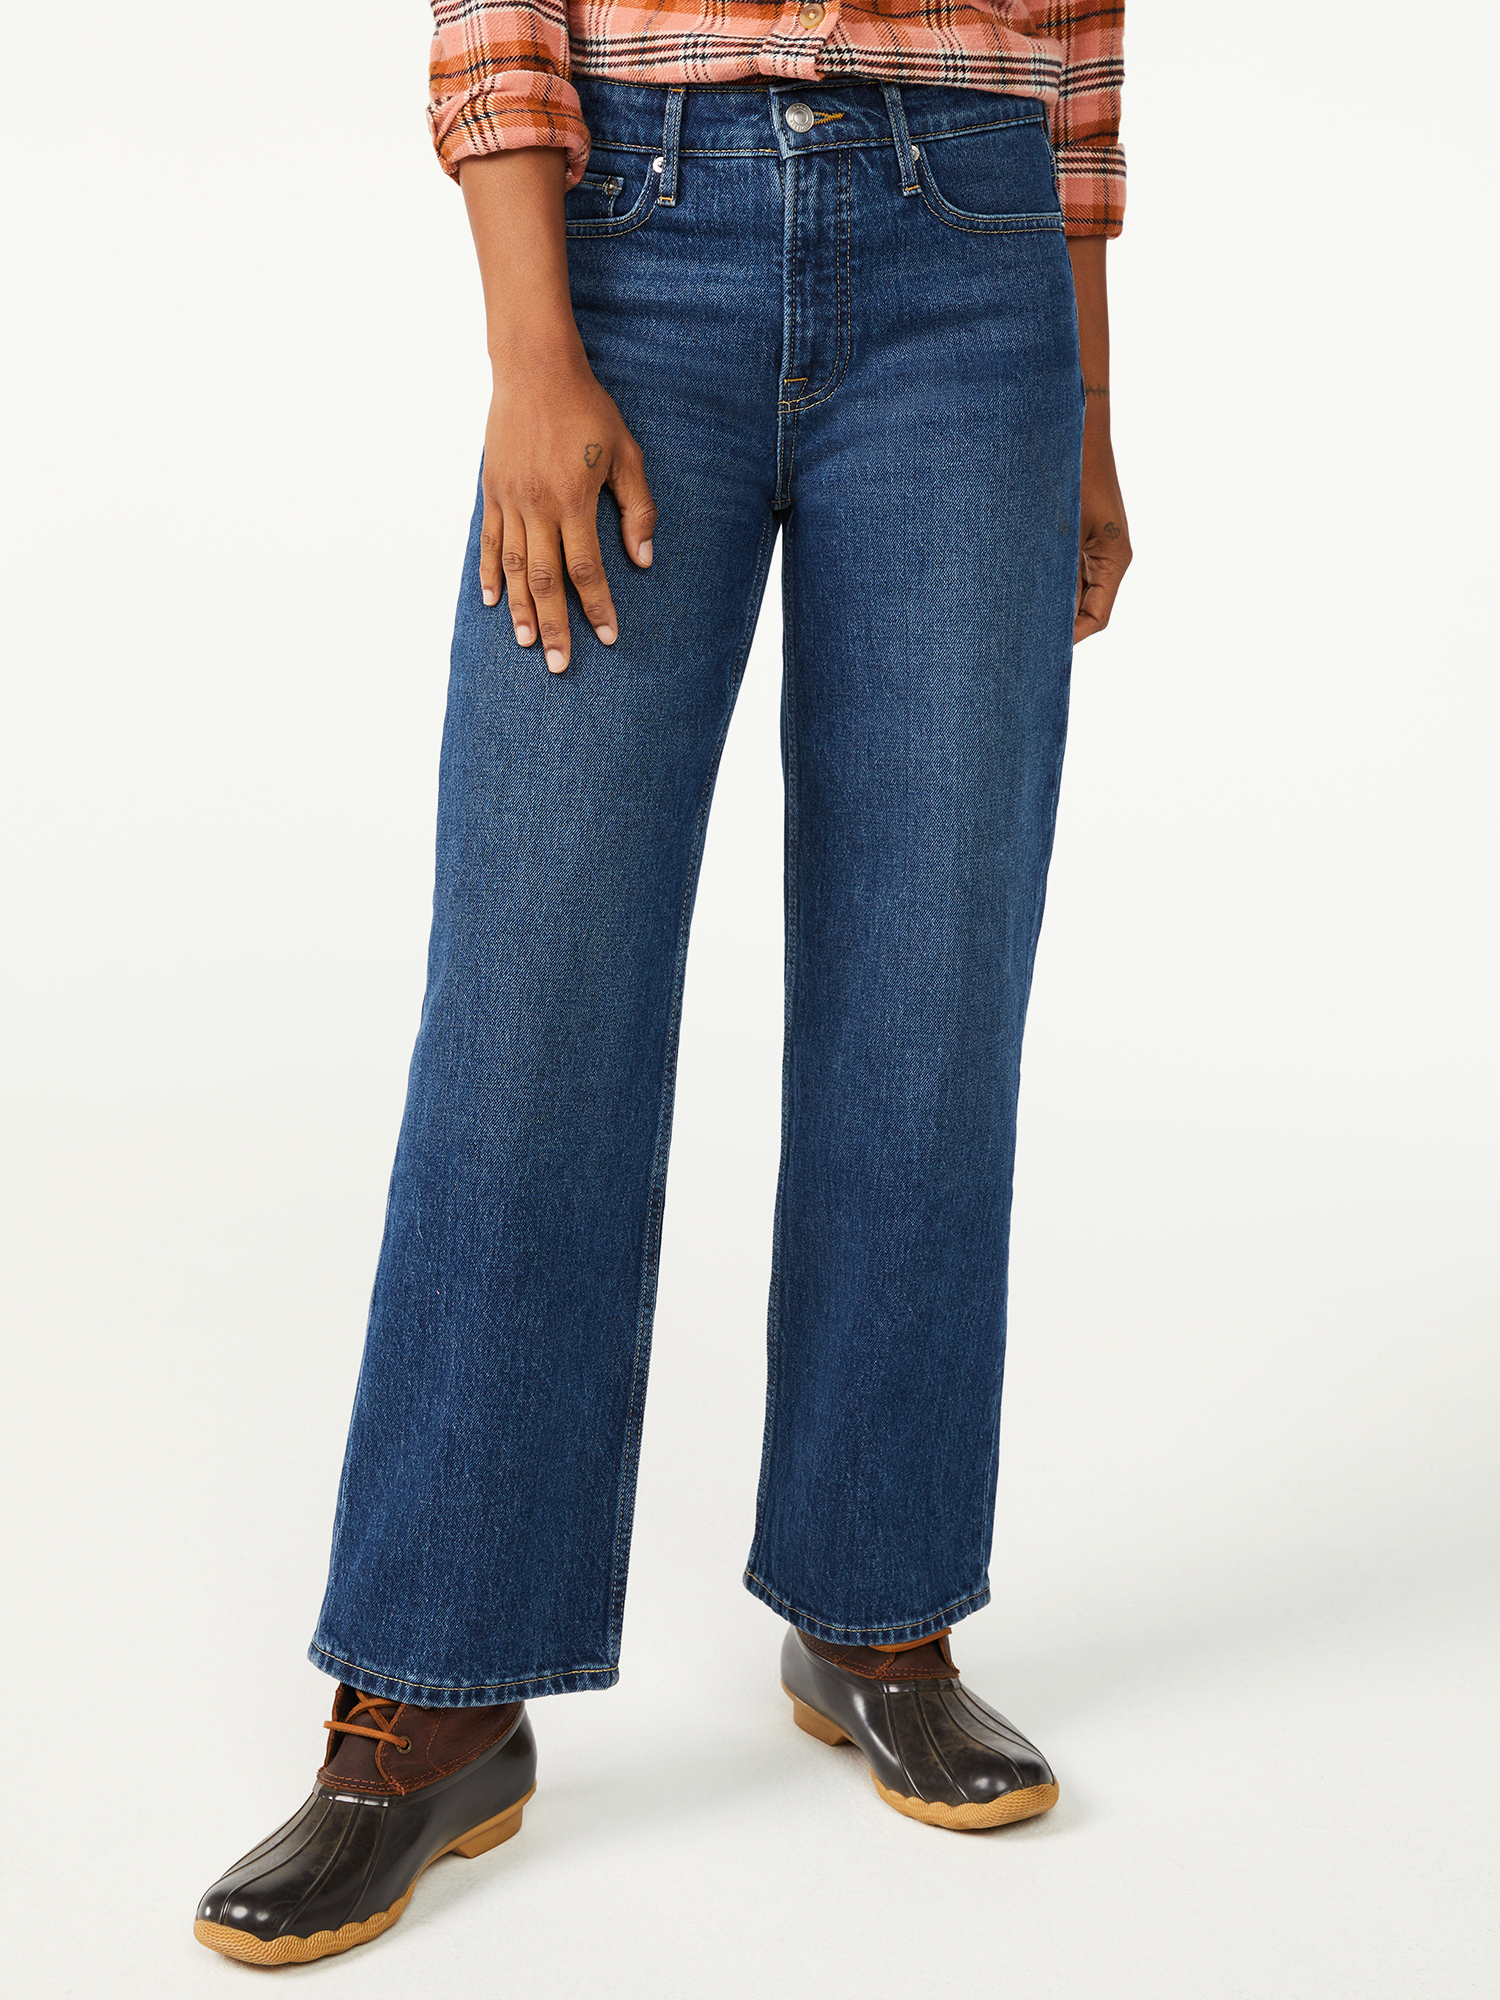 Free Assembly Women's Super High Rise Crop Wide Straight Jean - image 1 of 7